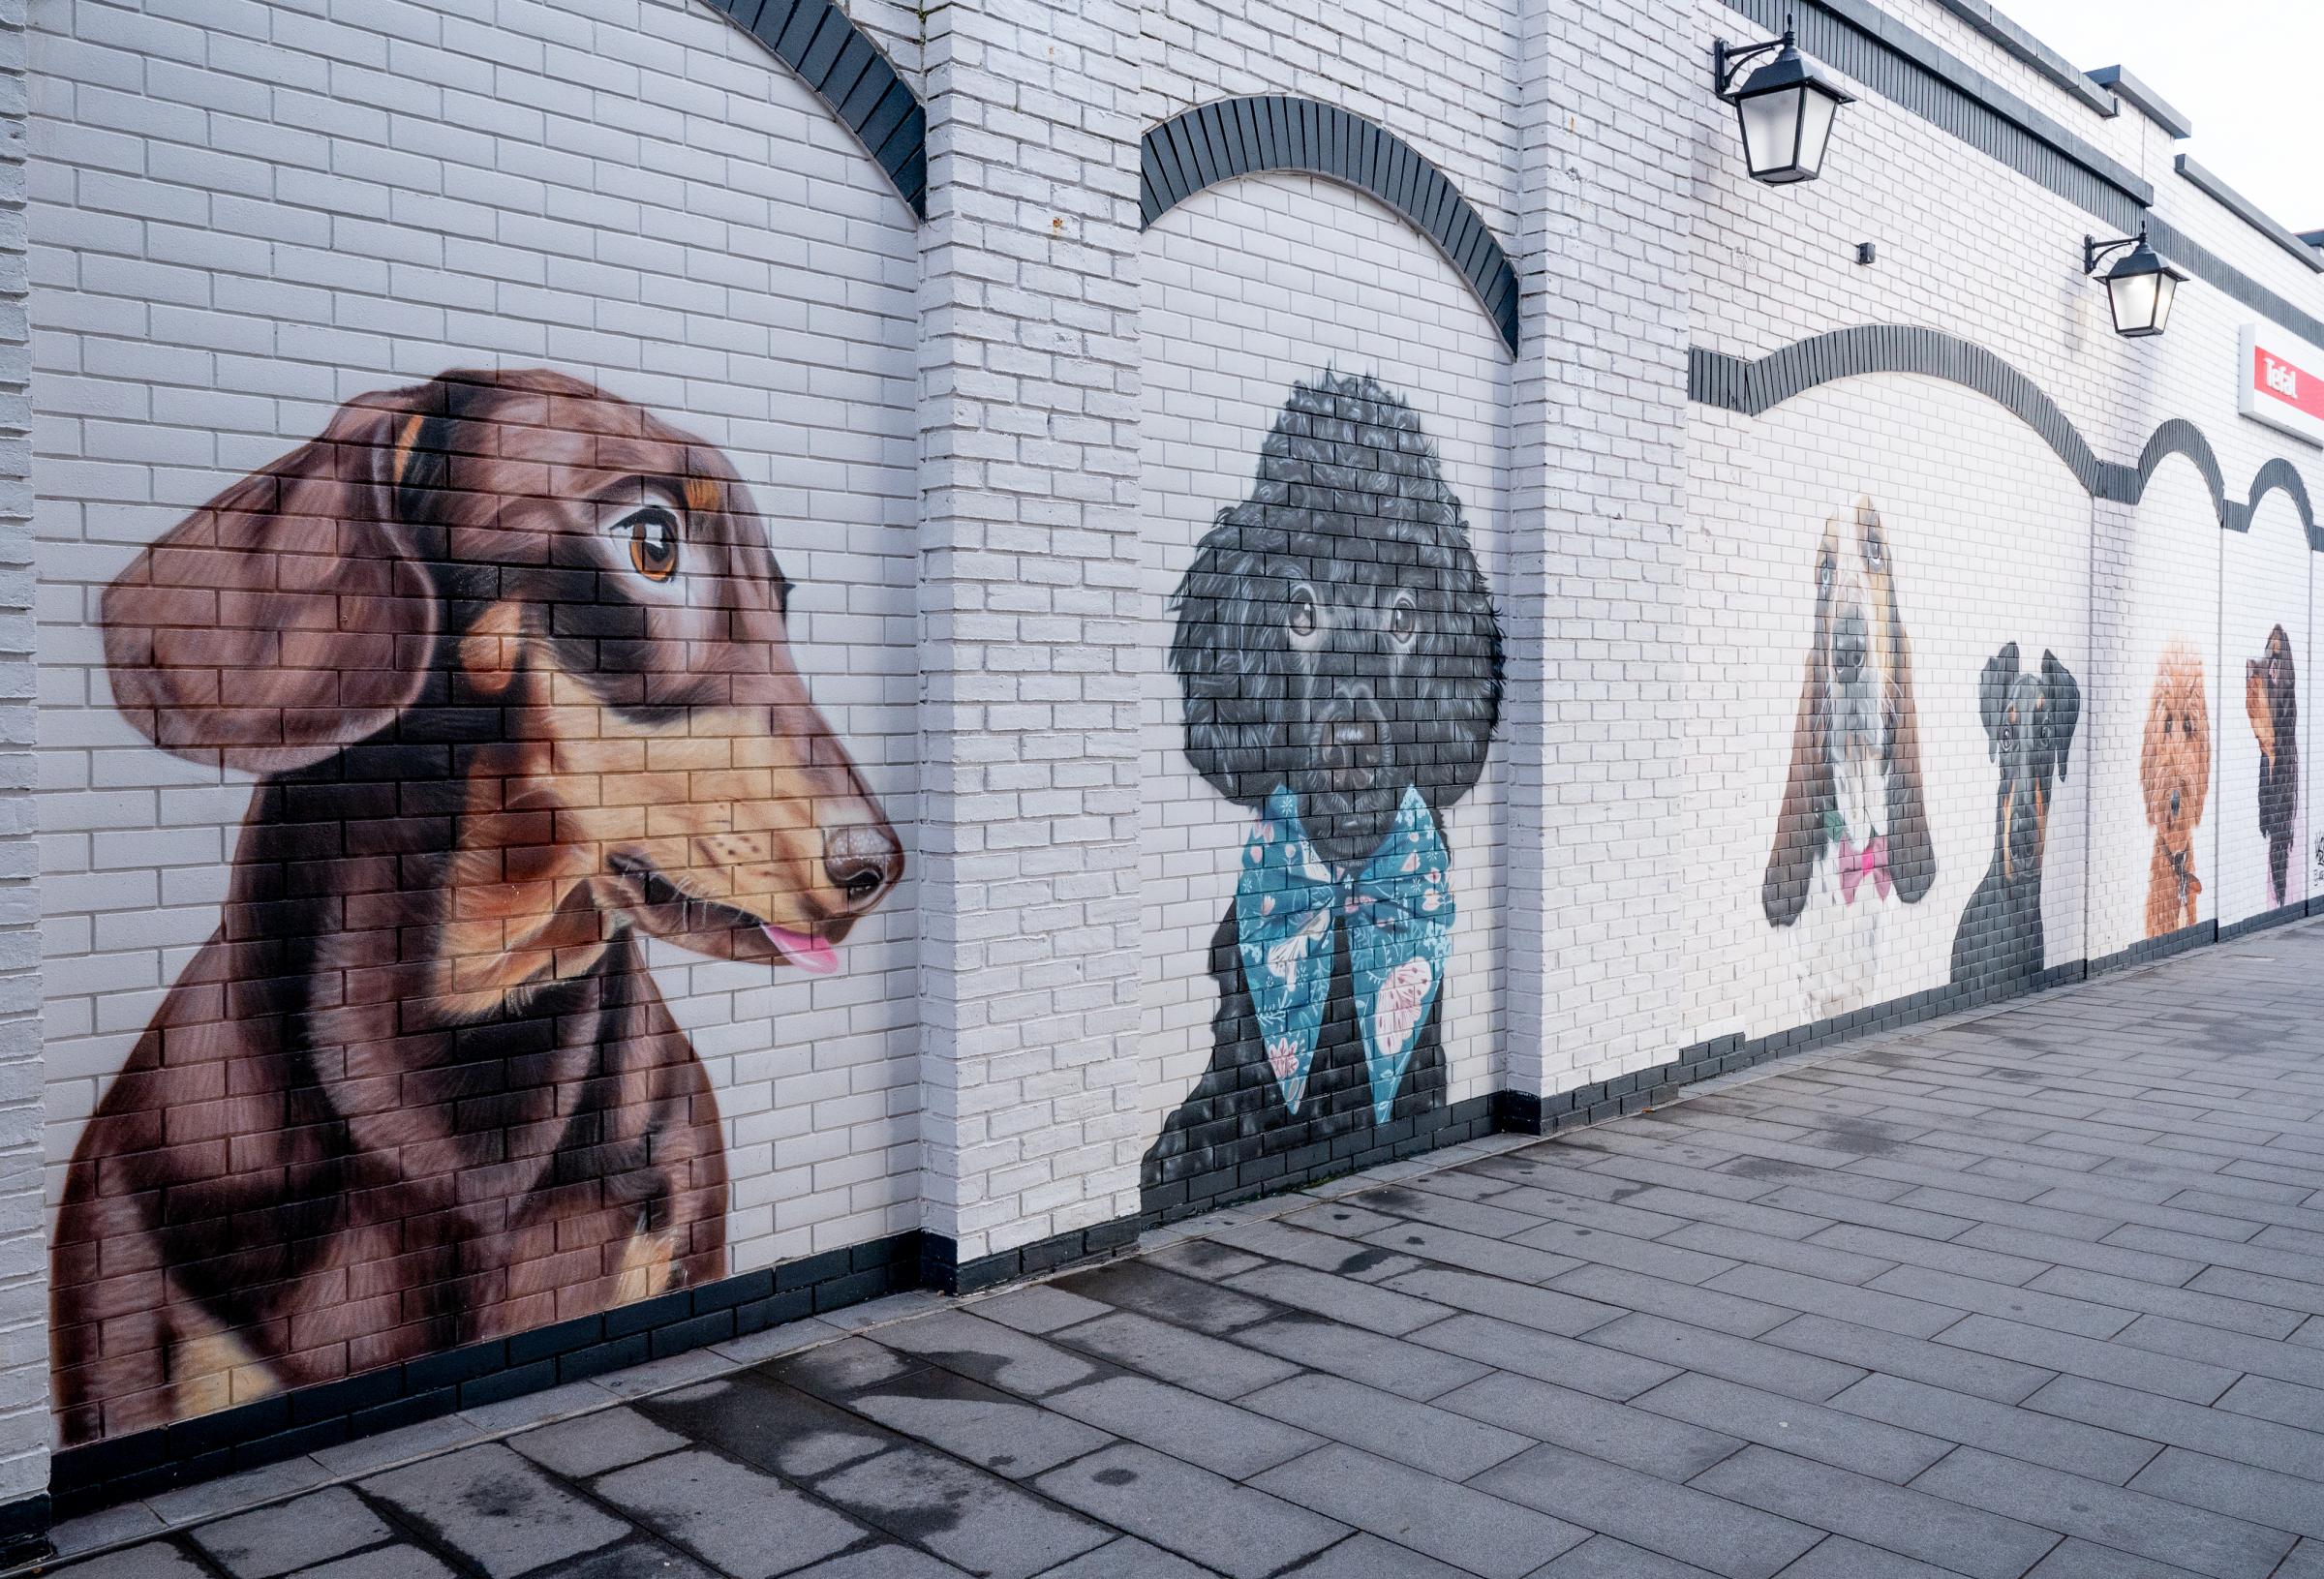 The new puppy mural at Cheshire Oaks.